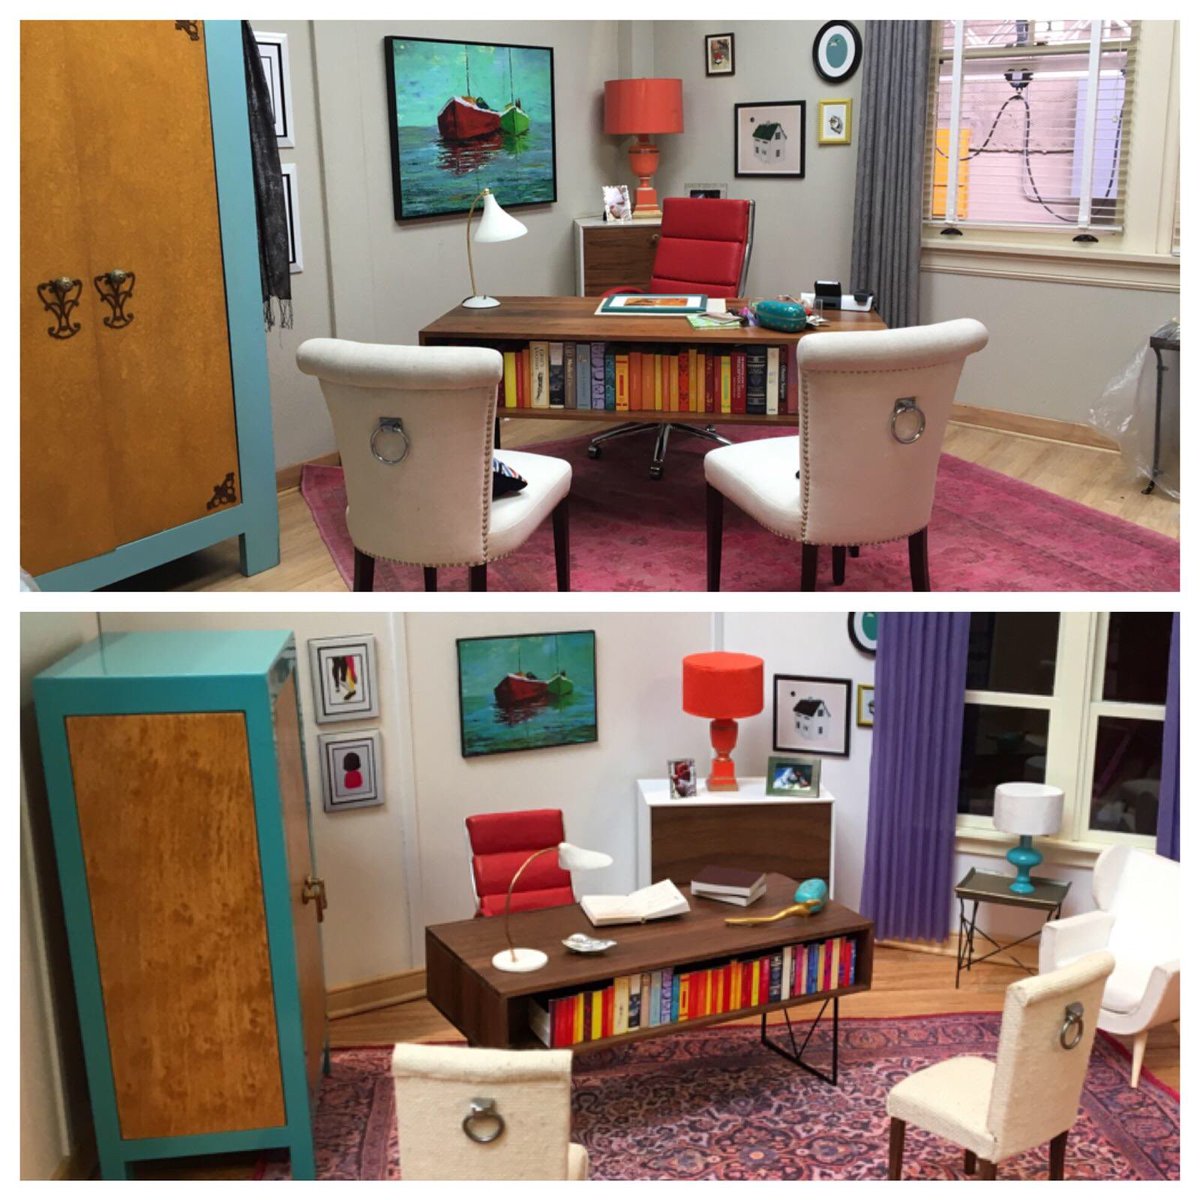 On top: Mindy Lahiri's office, below: a miniature dollhouse version of it. Amazing. https://t.co/3IGclbUcBY